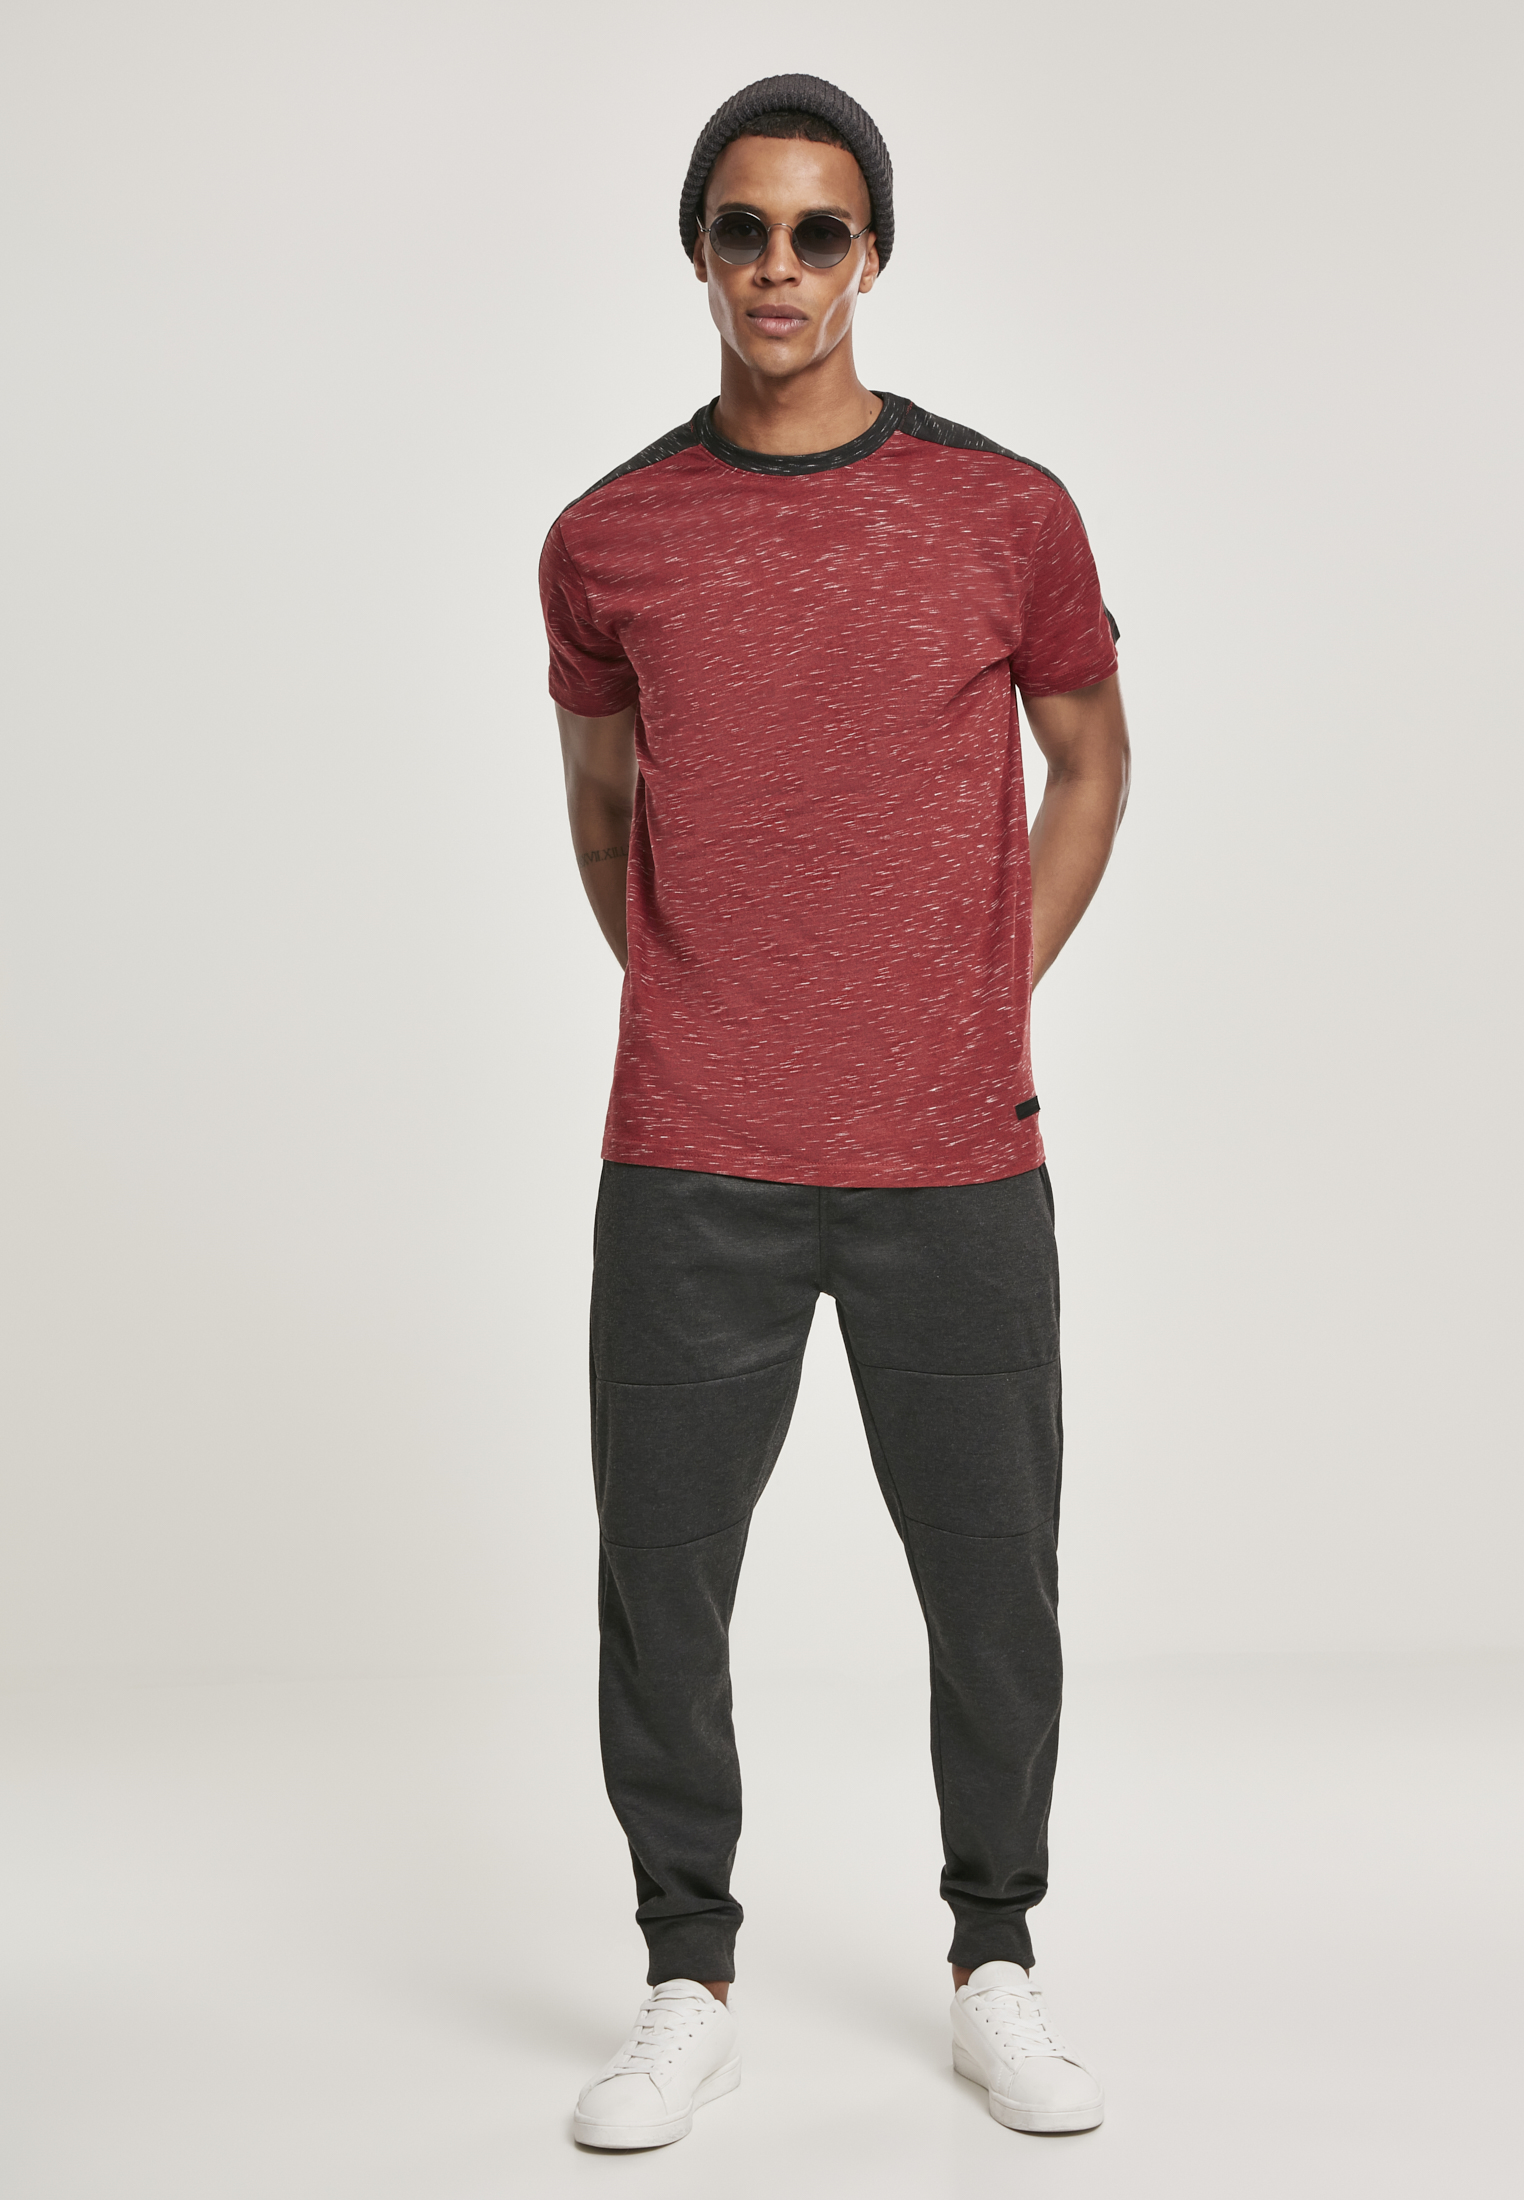 Southpole Shoulder Panel Tech Tee in Farbe marled red